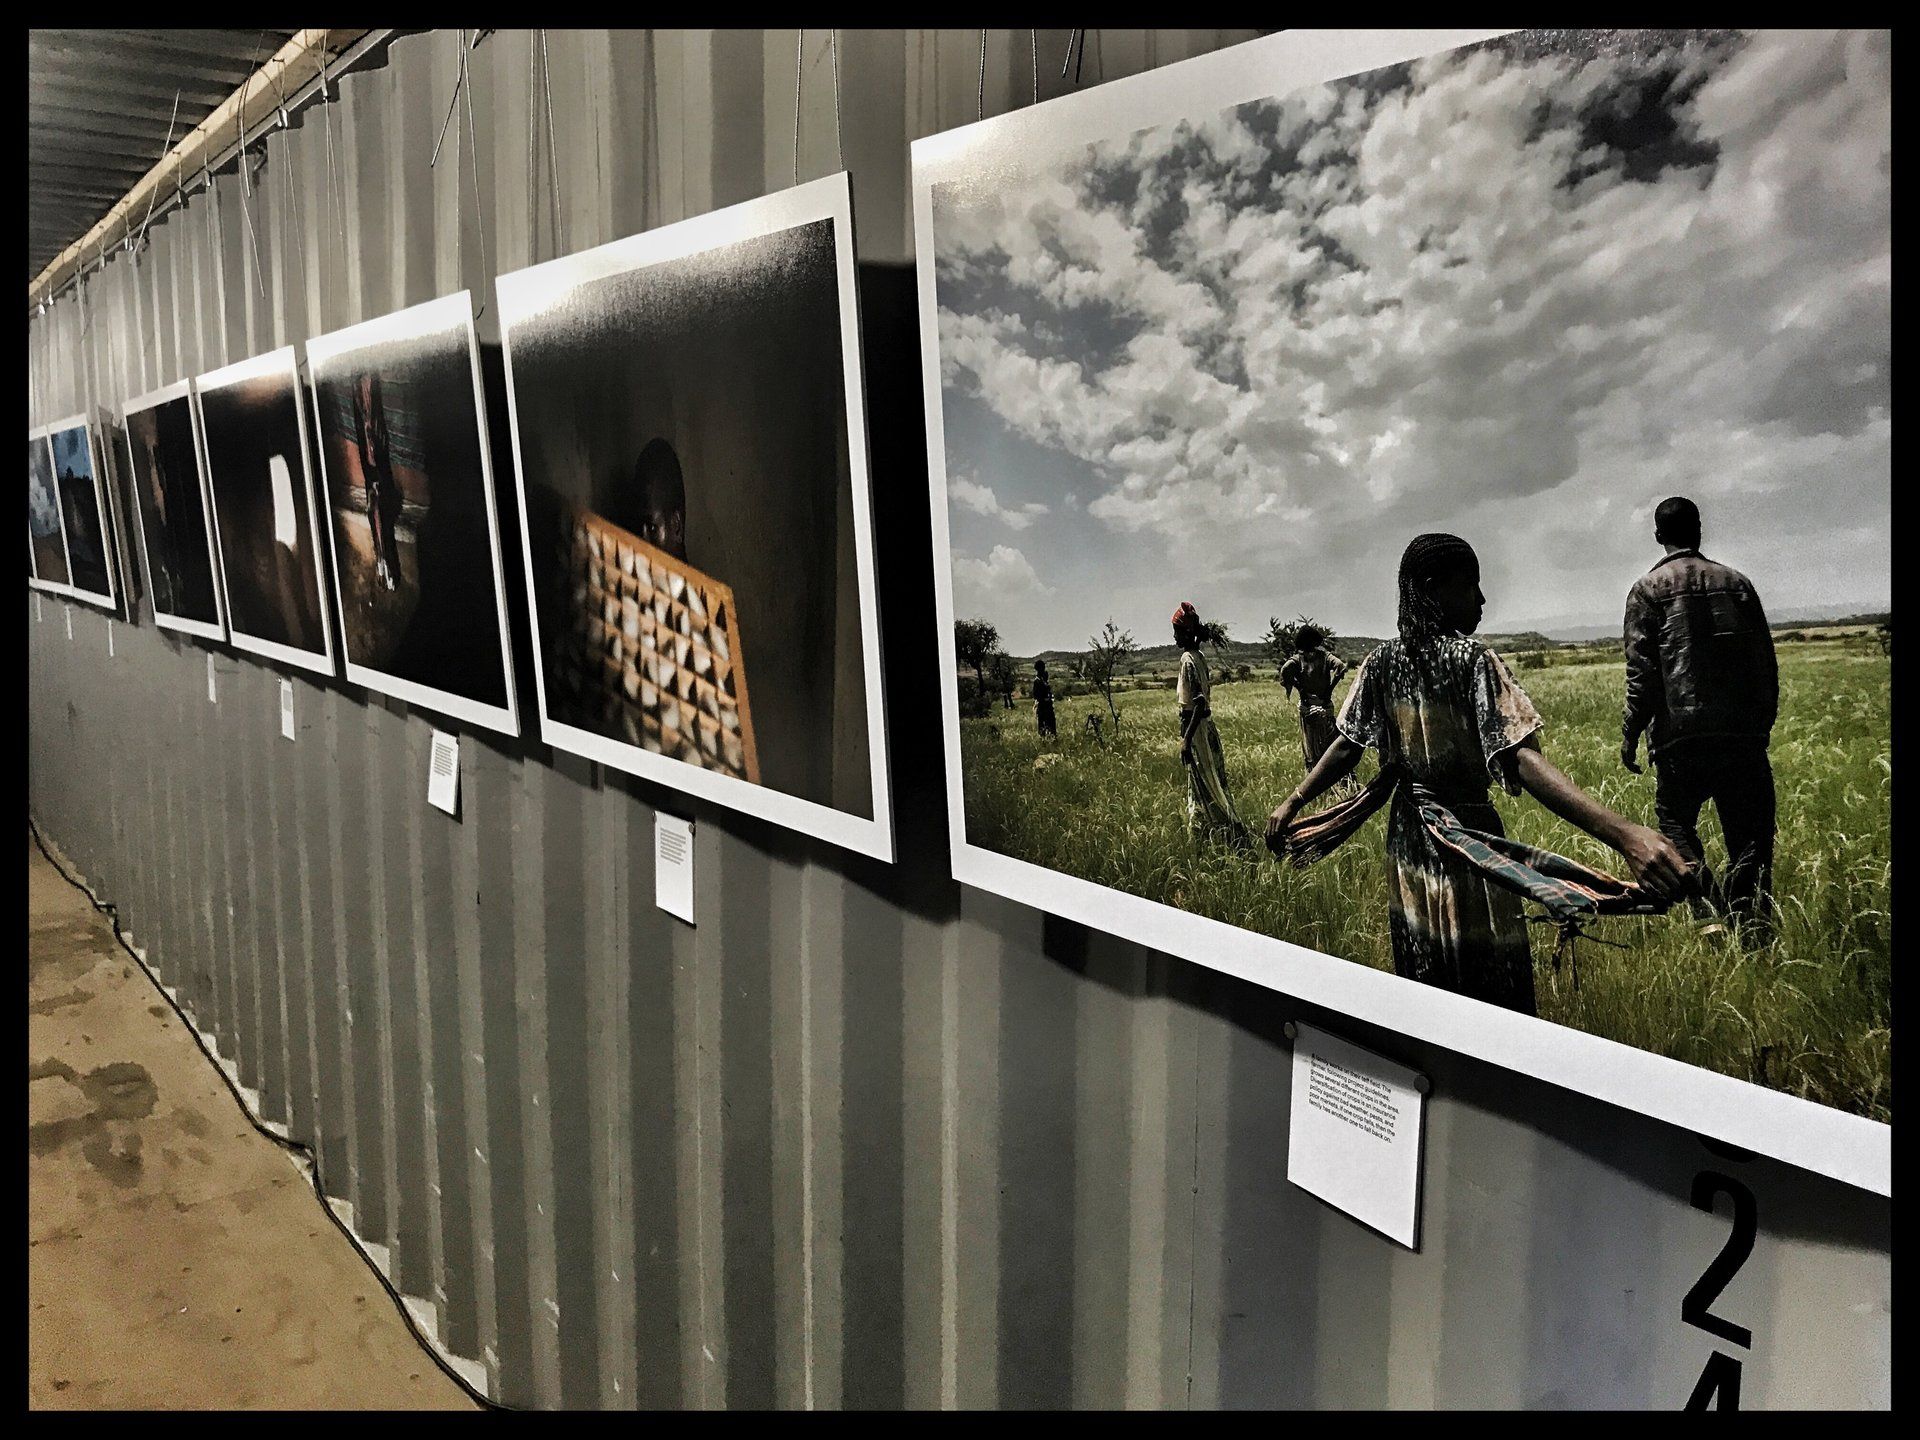 Blue Chip Foundation Exhibit at Brooklyn’s Photoville to Support Millennium Villages Project